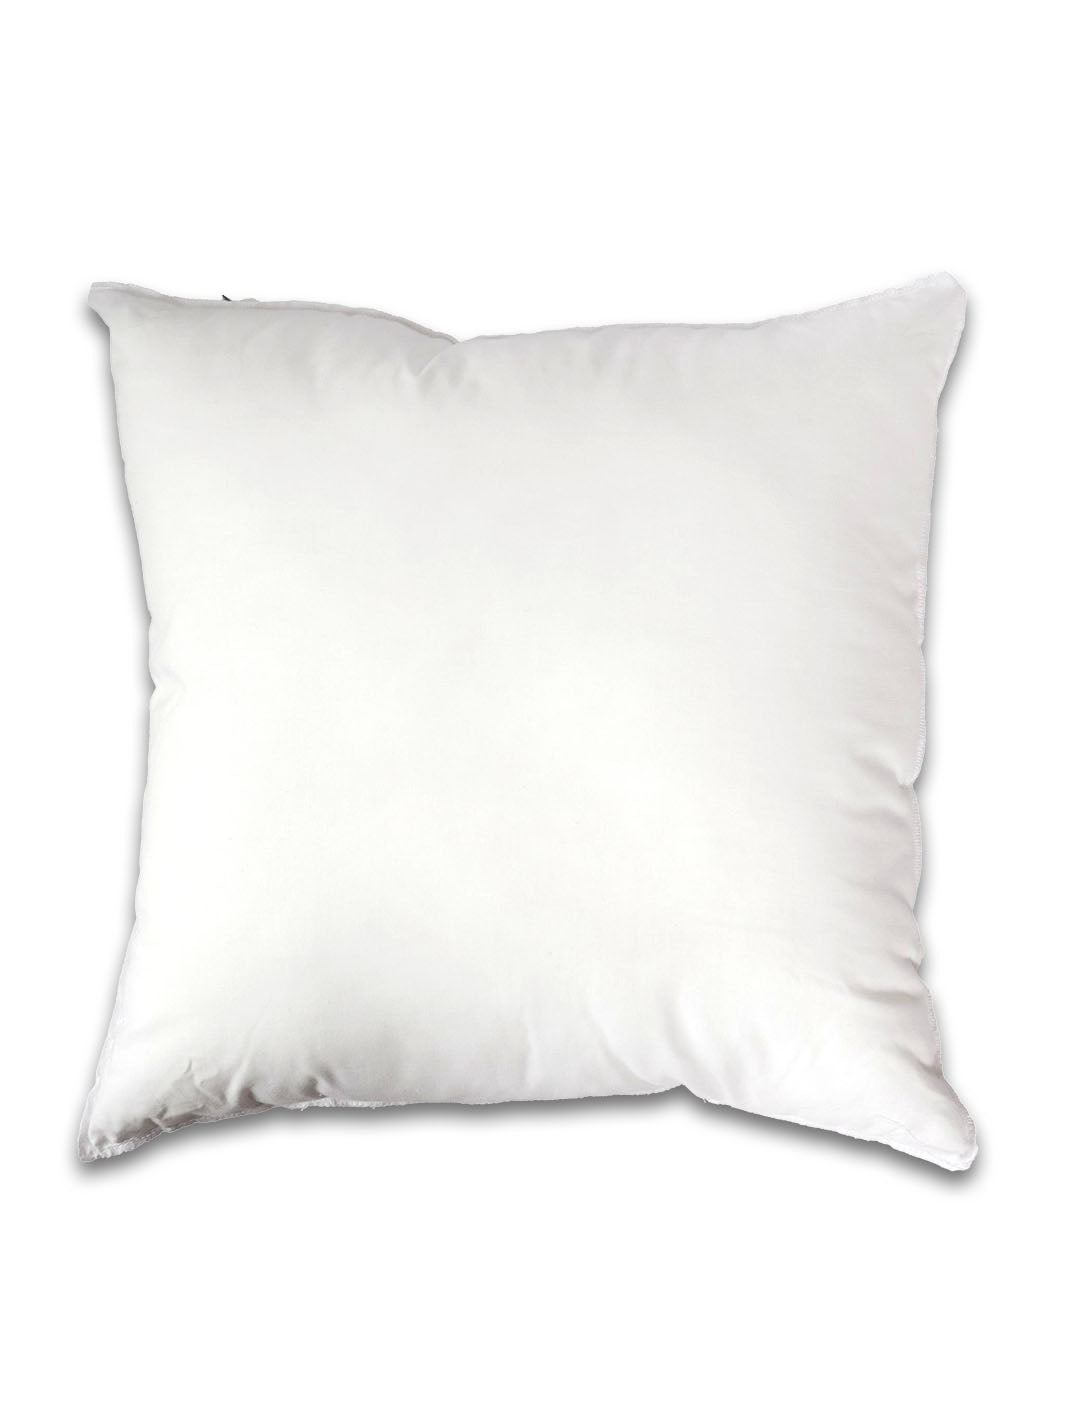 Pillow Insert 18" or 20" Earthly Comfort Home Decor 744